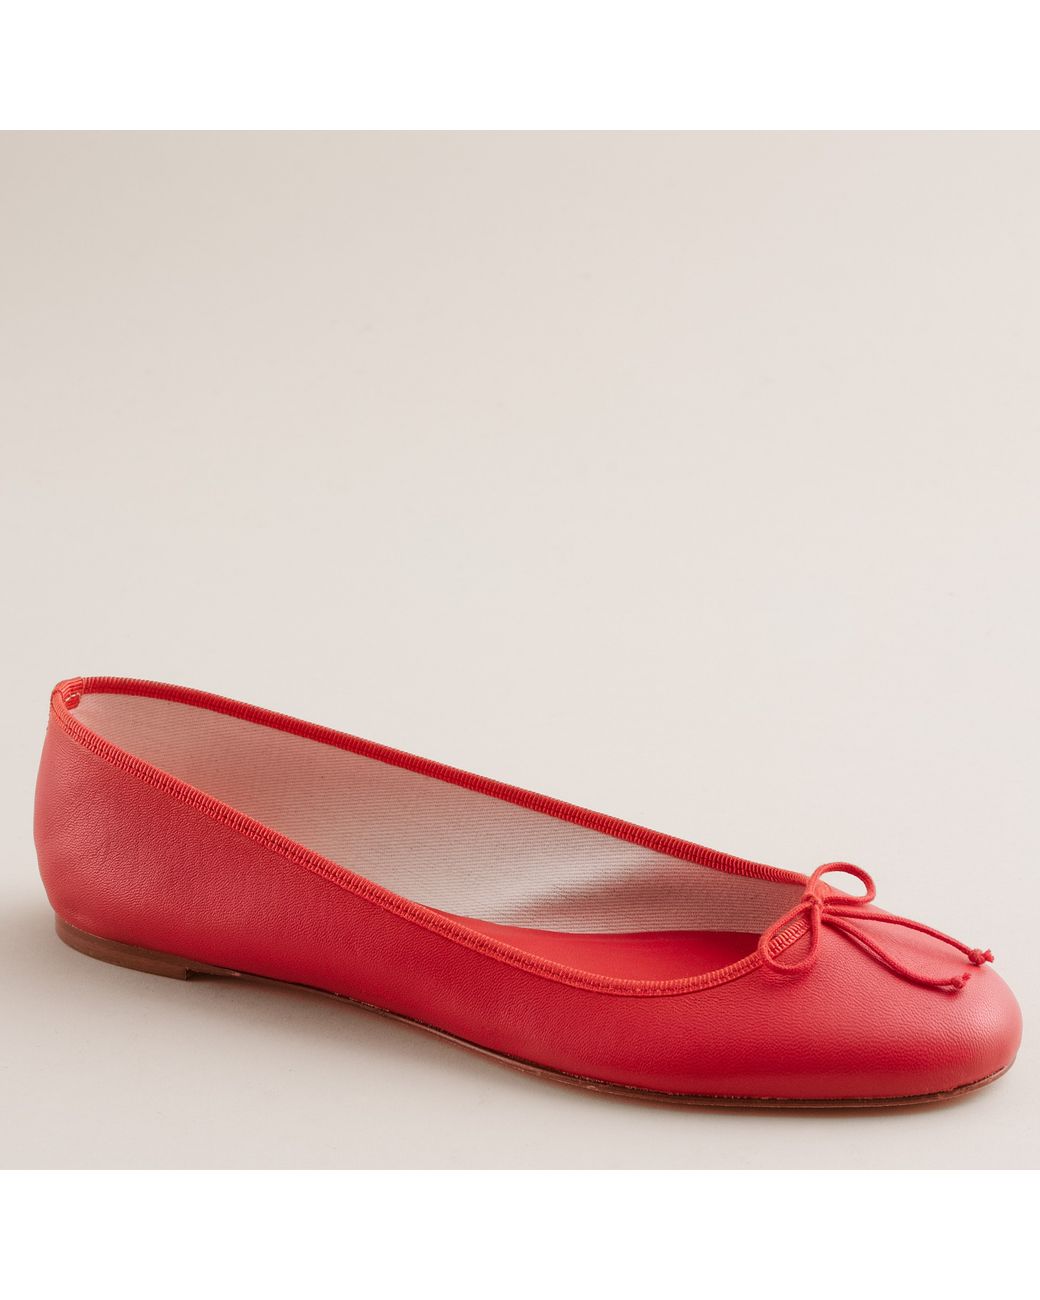 J.Crew Classic Leather Ballet Flats in Red | Lyst